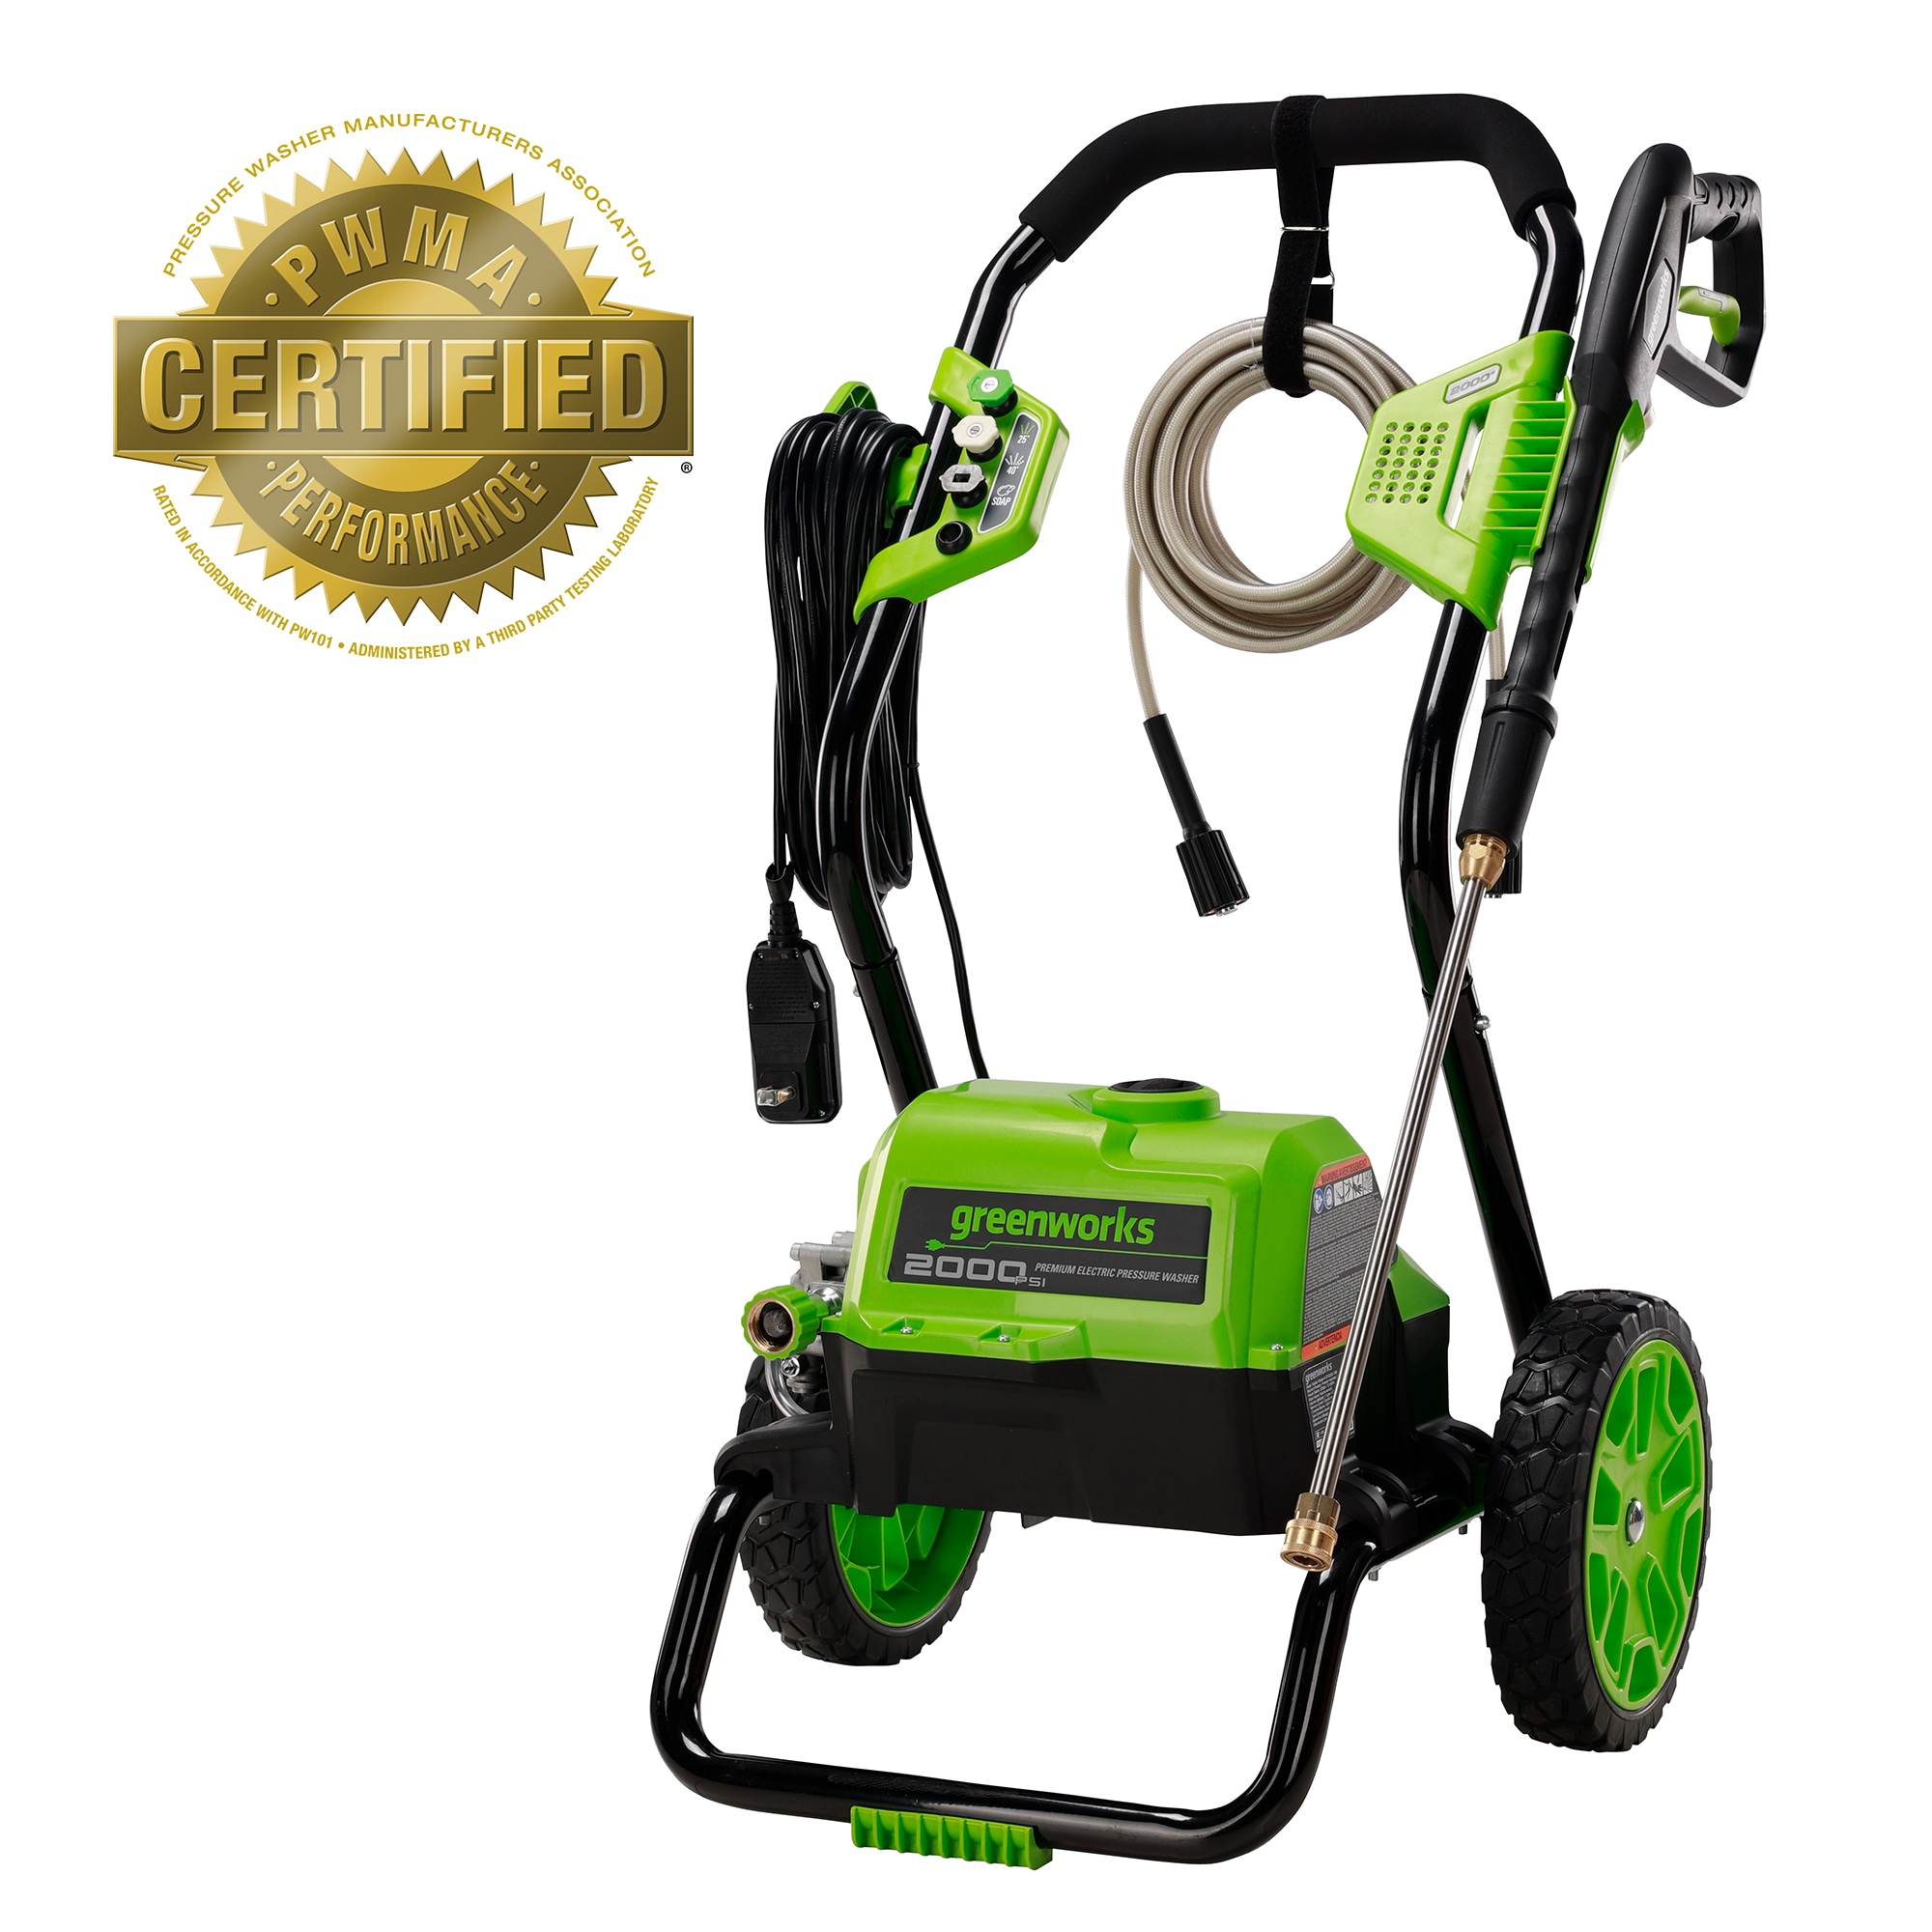 Greenworks 2000 PSI 1.1-Gallons Cold Water Electric Pressure Washer